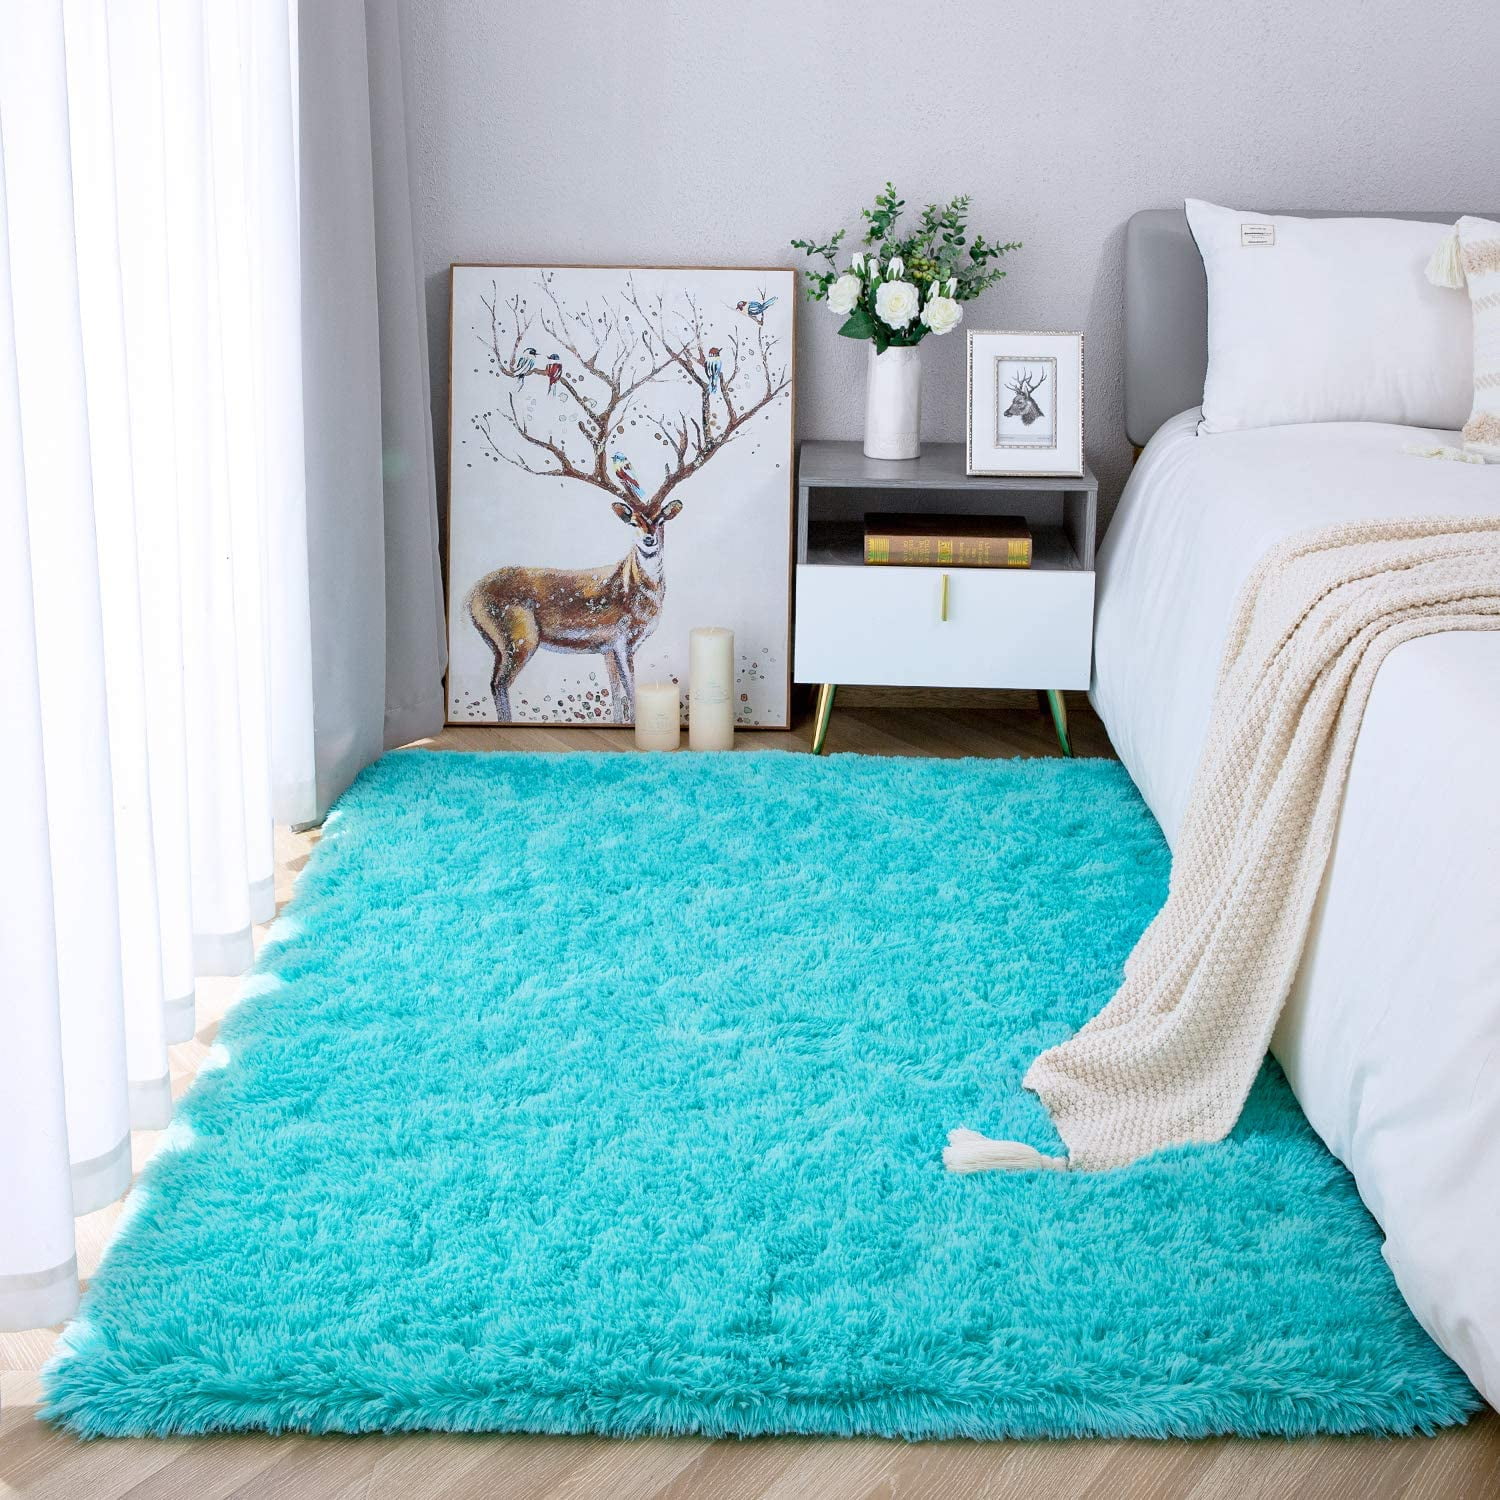 Kids Teal Blue Shaggy Rug Childrens Bedroom Shaggy Soft Non Shed Easy Clean Mat 